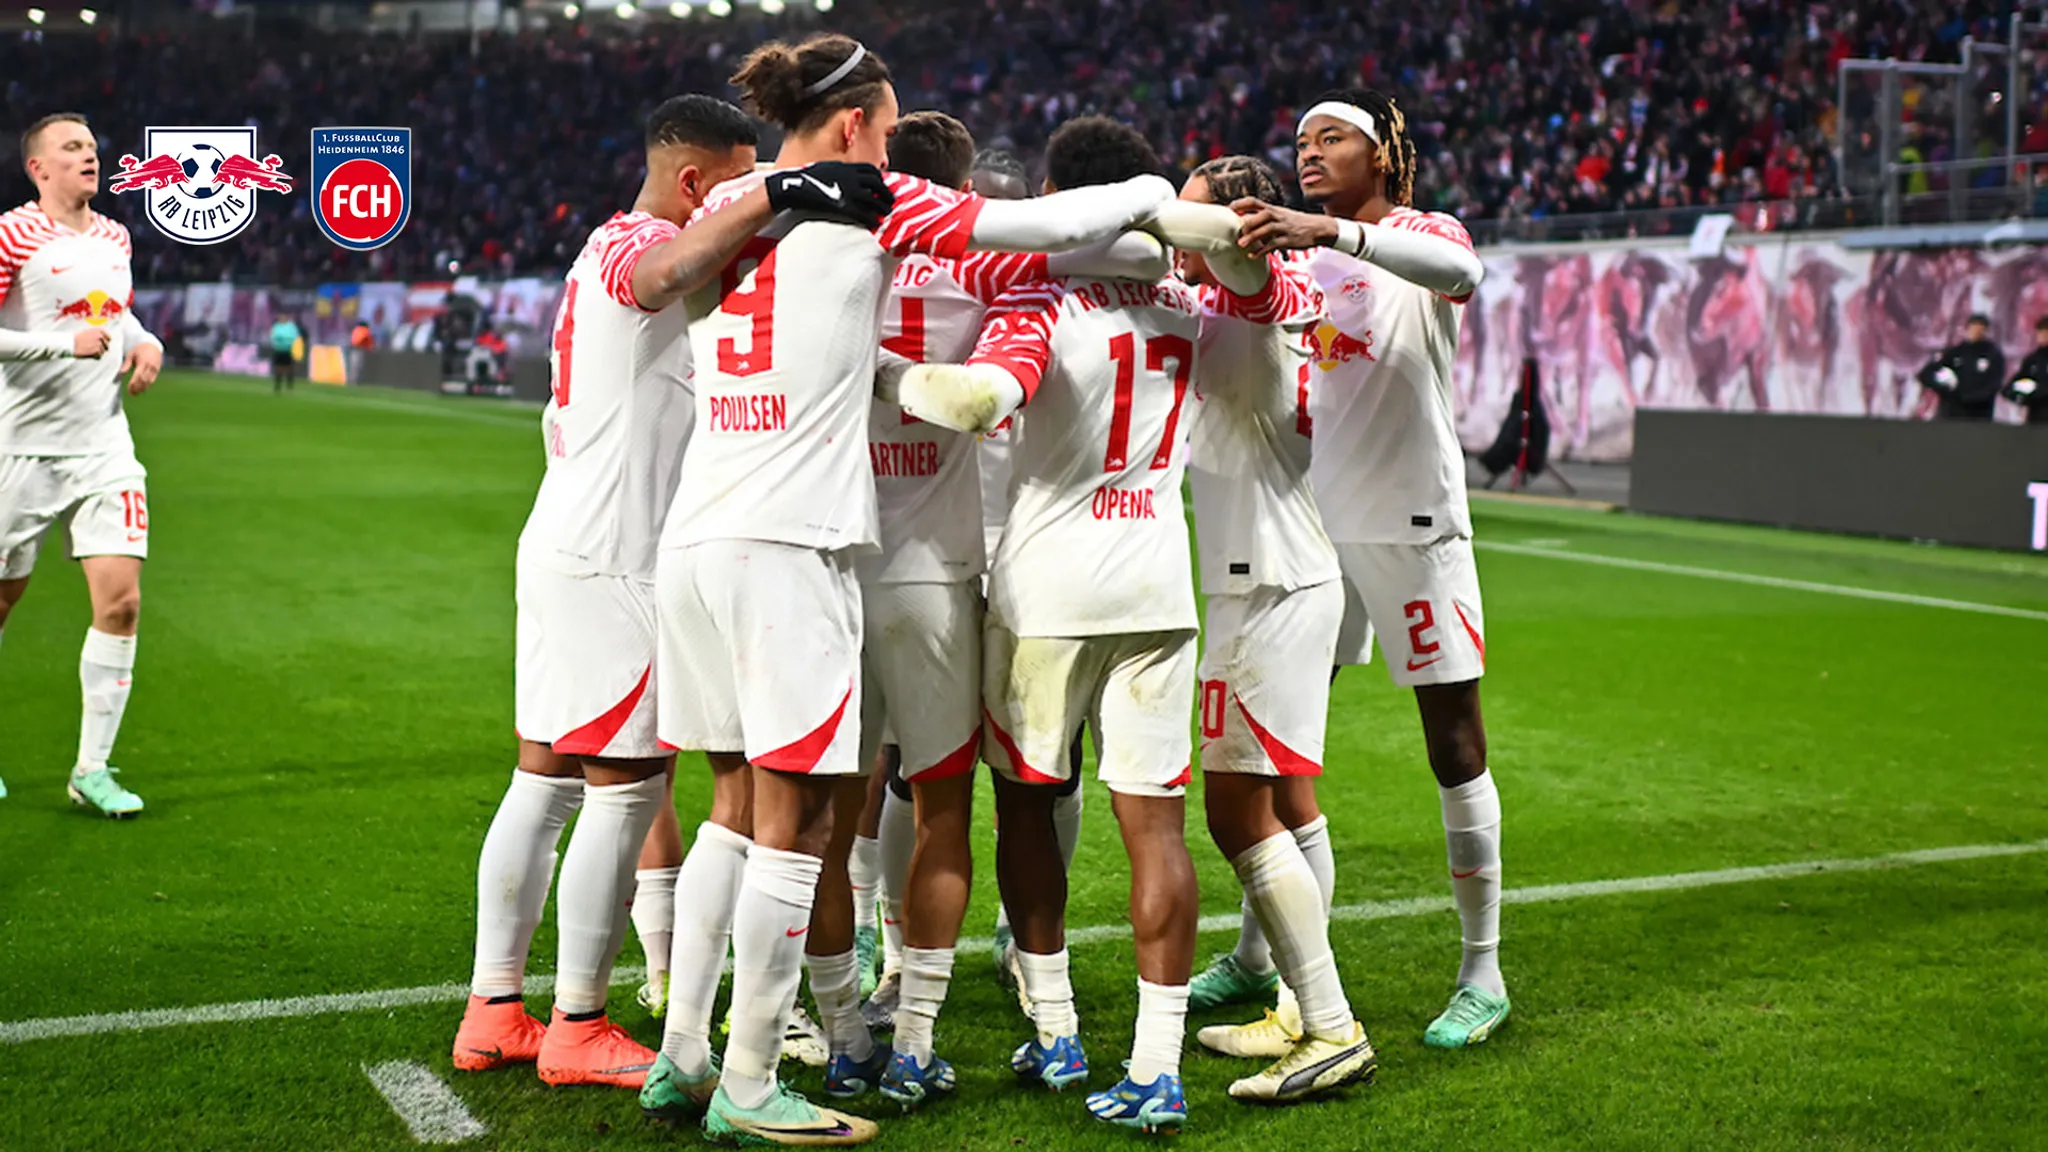 The RB Leipzig players celebrate the opening goal against Heidenheim